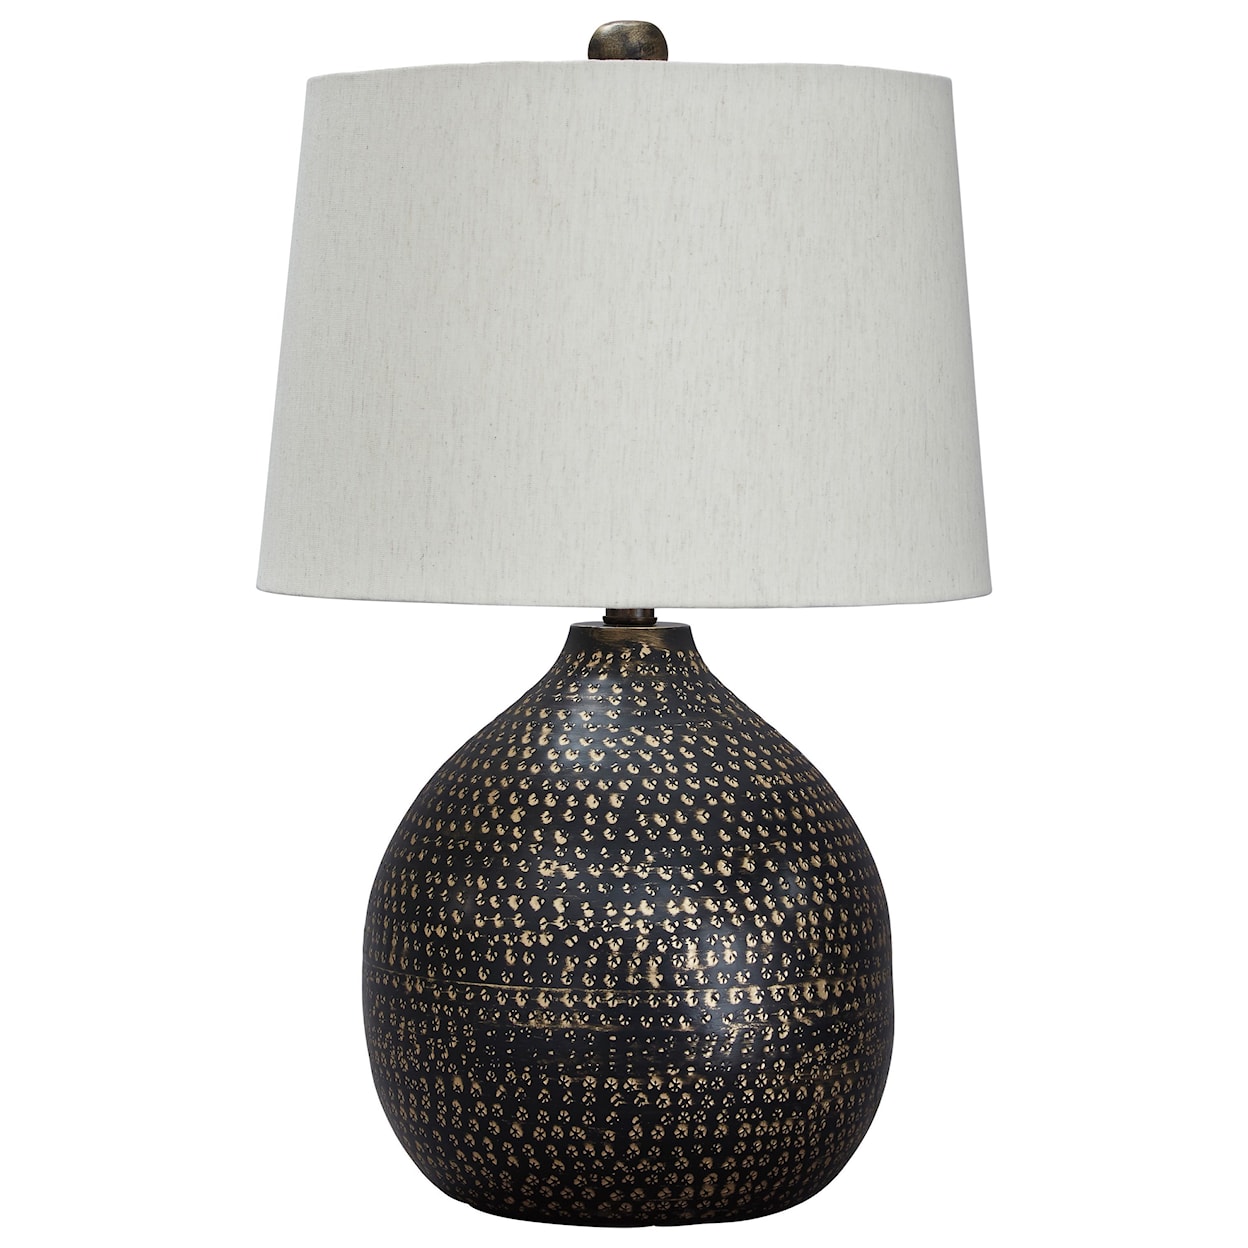 Signature Design by Ashley Lamps - Contemporary Table Lamp